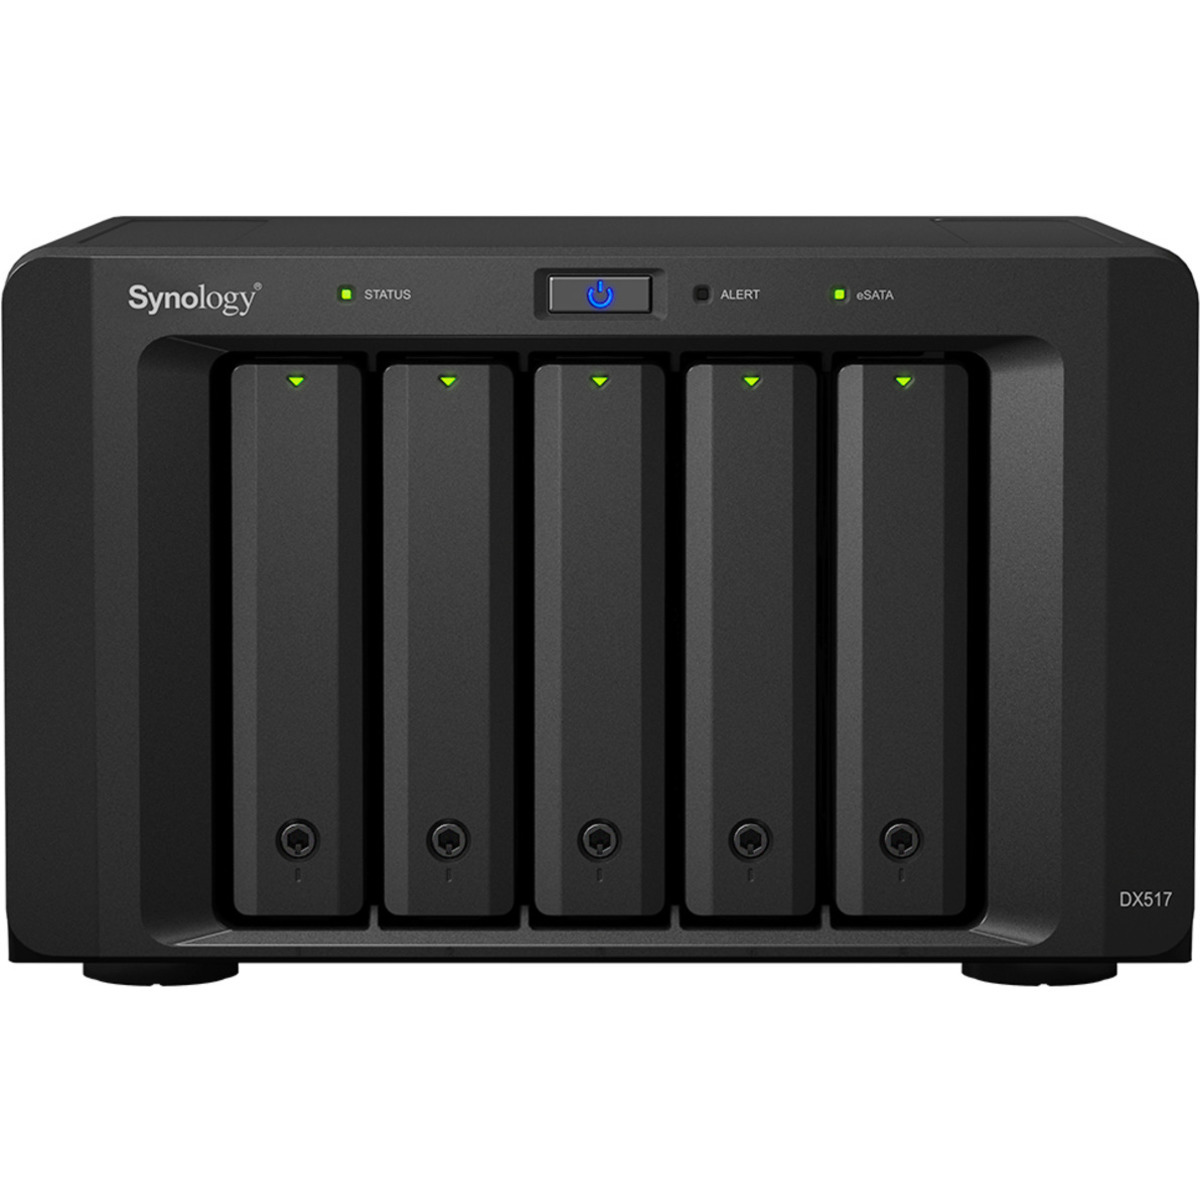 buy $1073 Synology DX517 5tb Desktop Expansion Enclosure 5x1000gb Samsung 870 QVO MZ-77Q1T0 2.5 SATA 6Gb/s SSD CONSUMER Class Drives Installed - Burn-In Tested - nas headquarters buy network attached storage server device das new raid-5 free shipping usa DX517